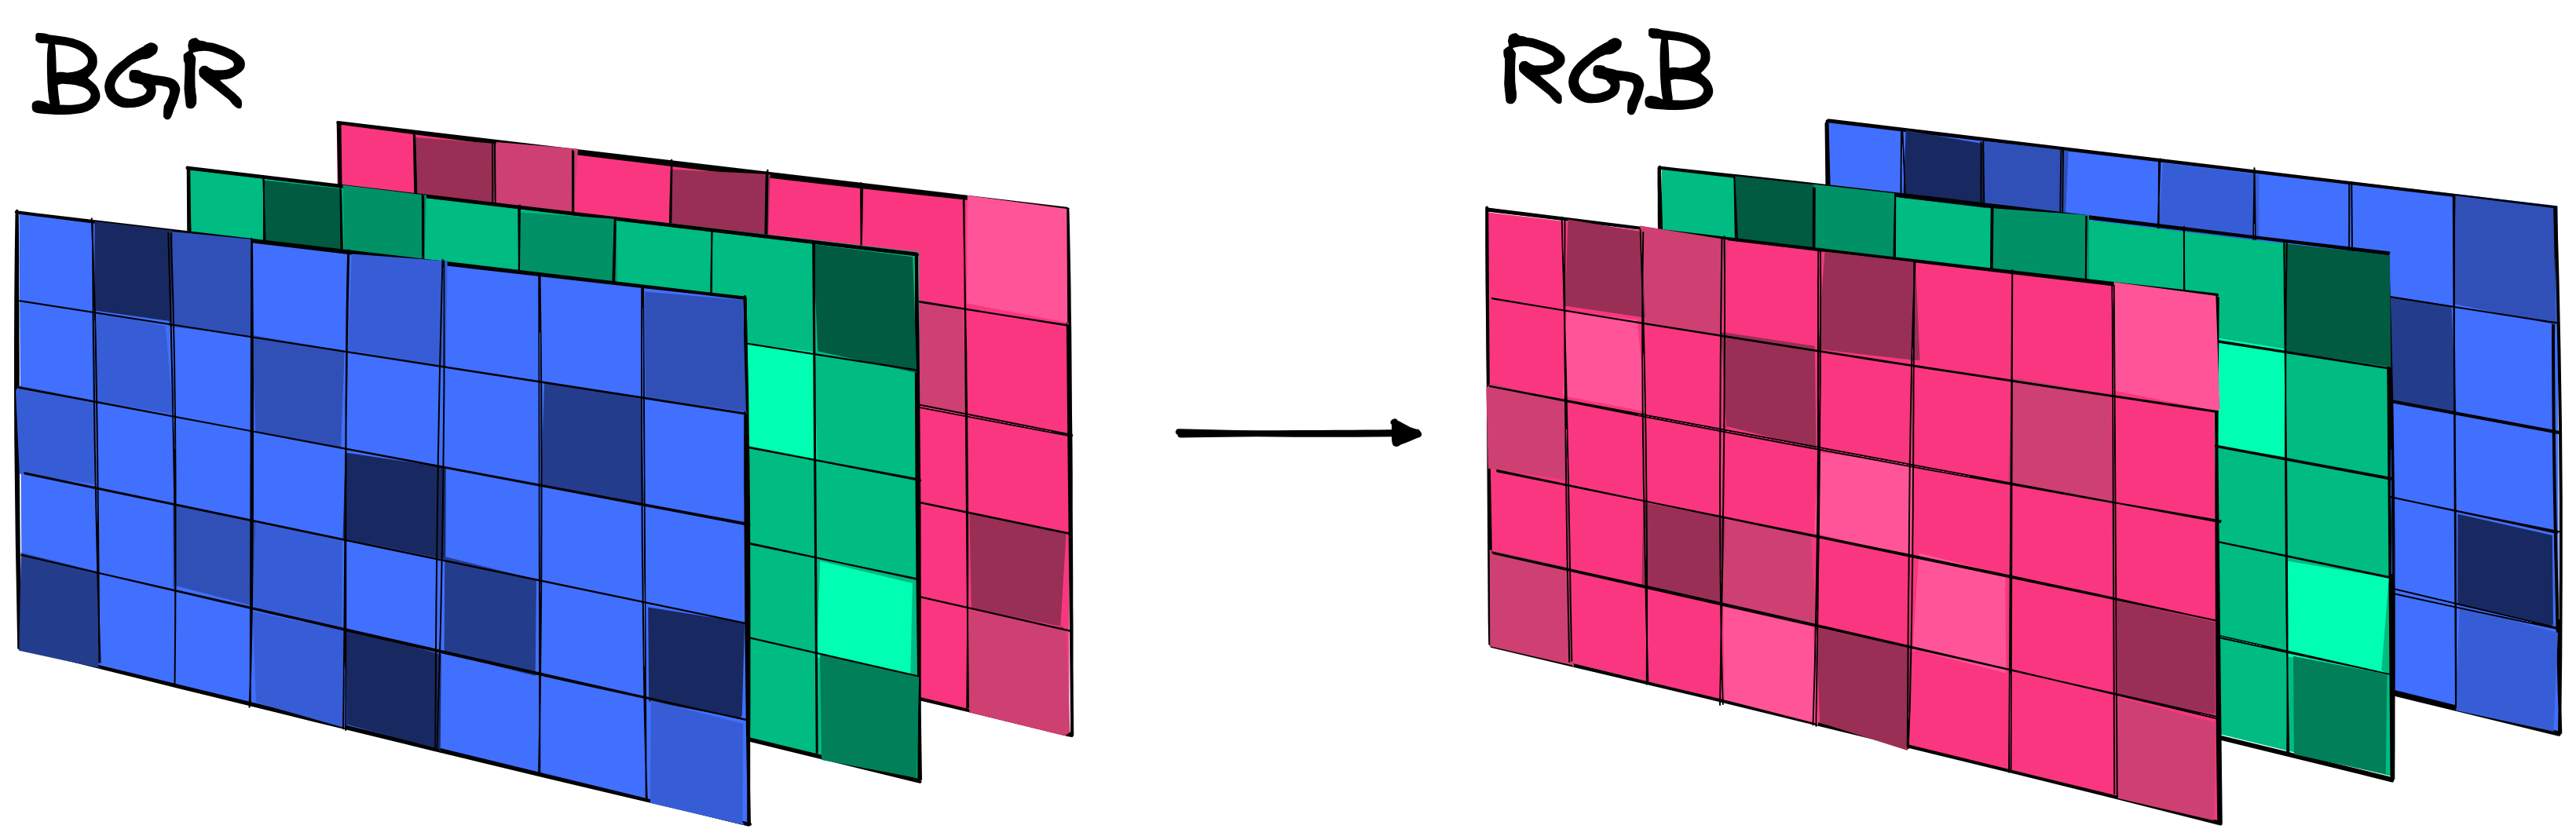 OpenCV reads images using BGR format, we flip the arrays to RGB so that we can view the true color image in matplotlib.